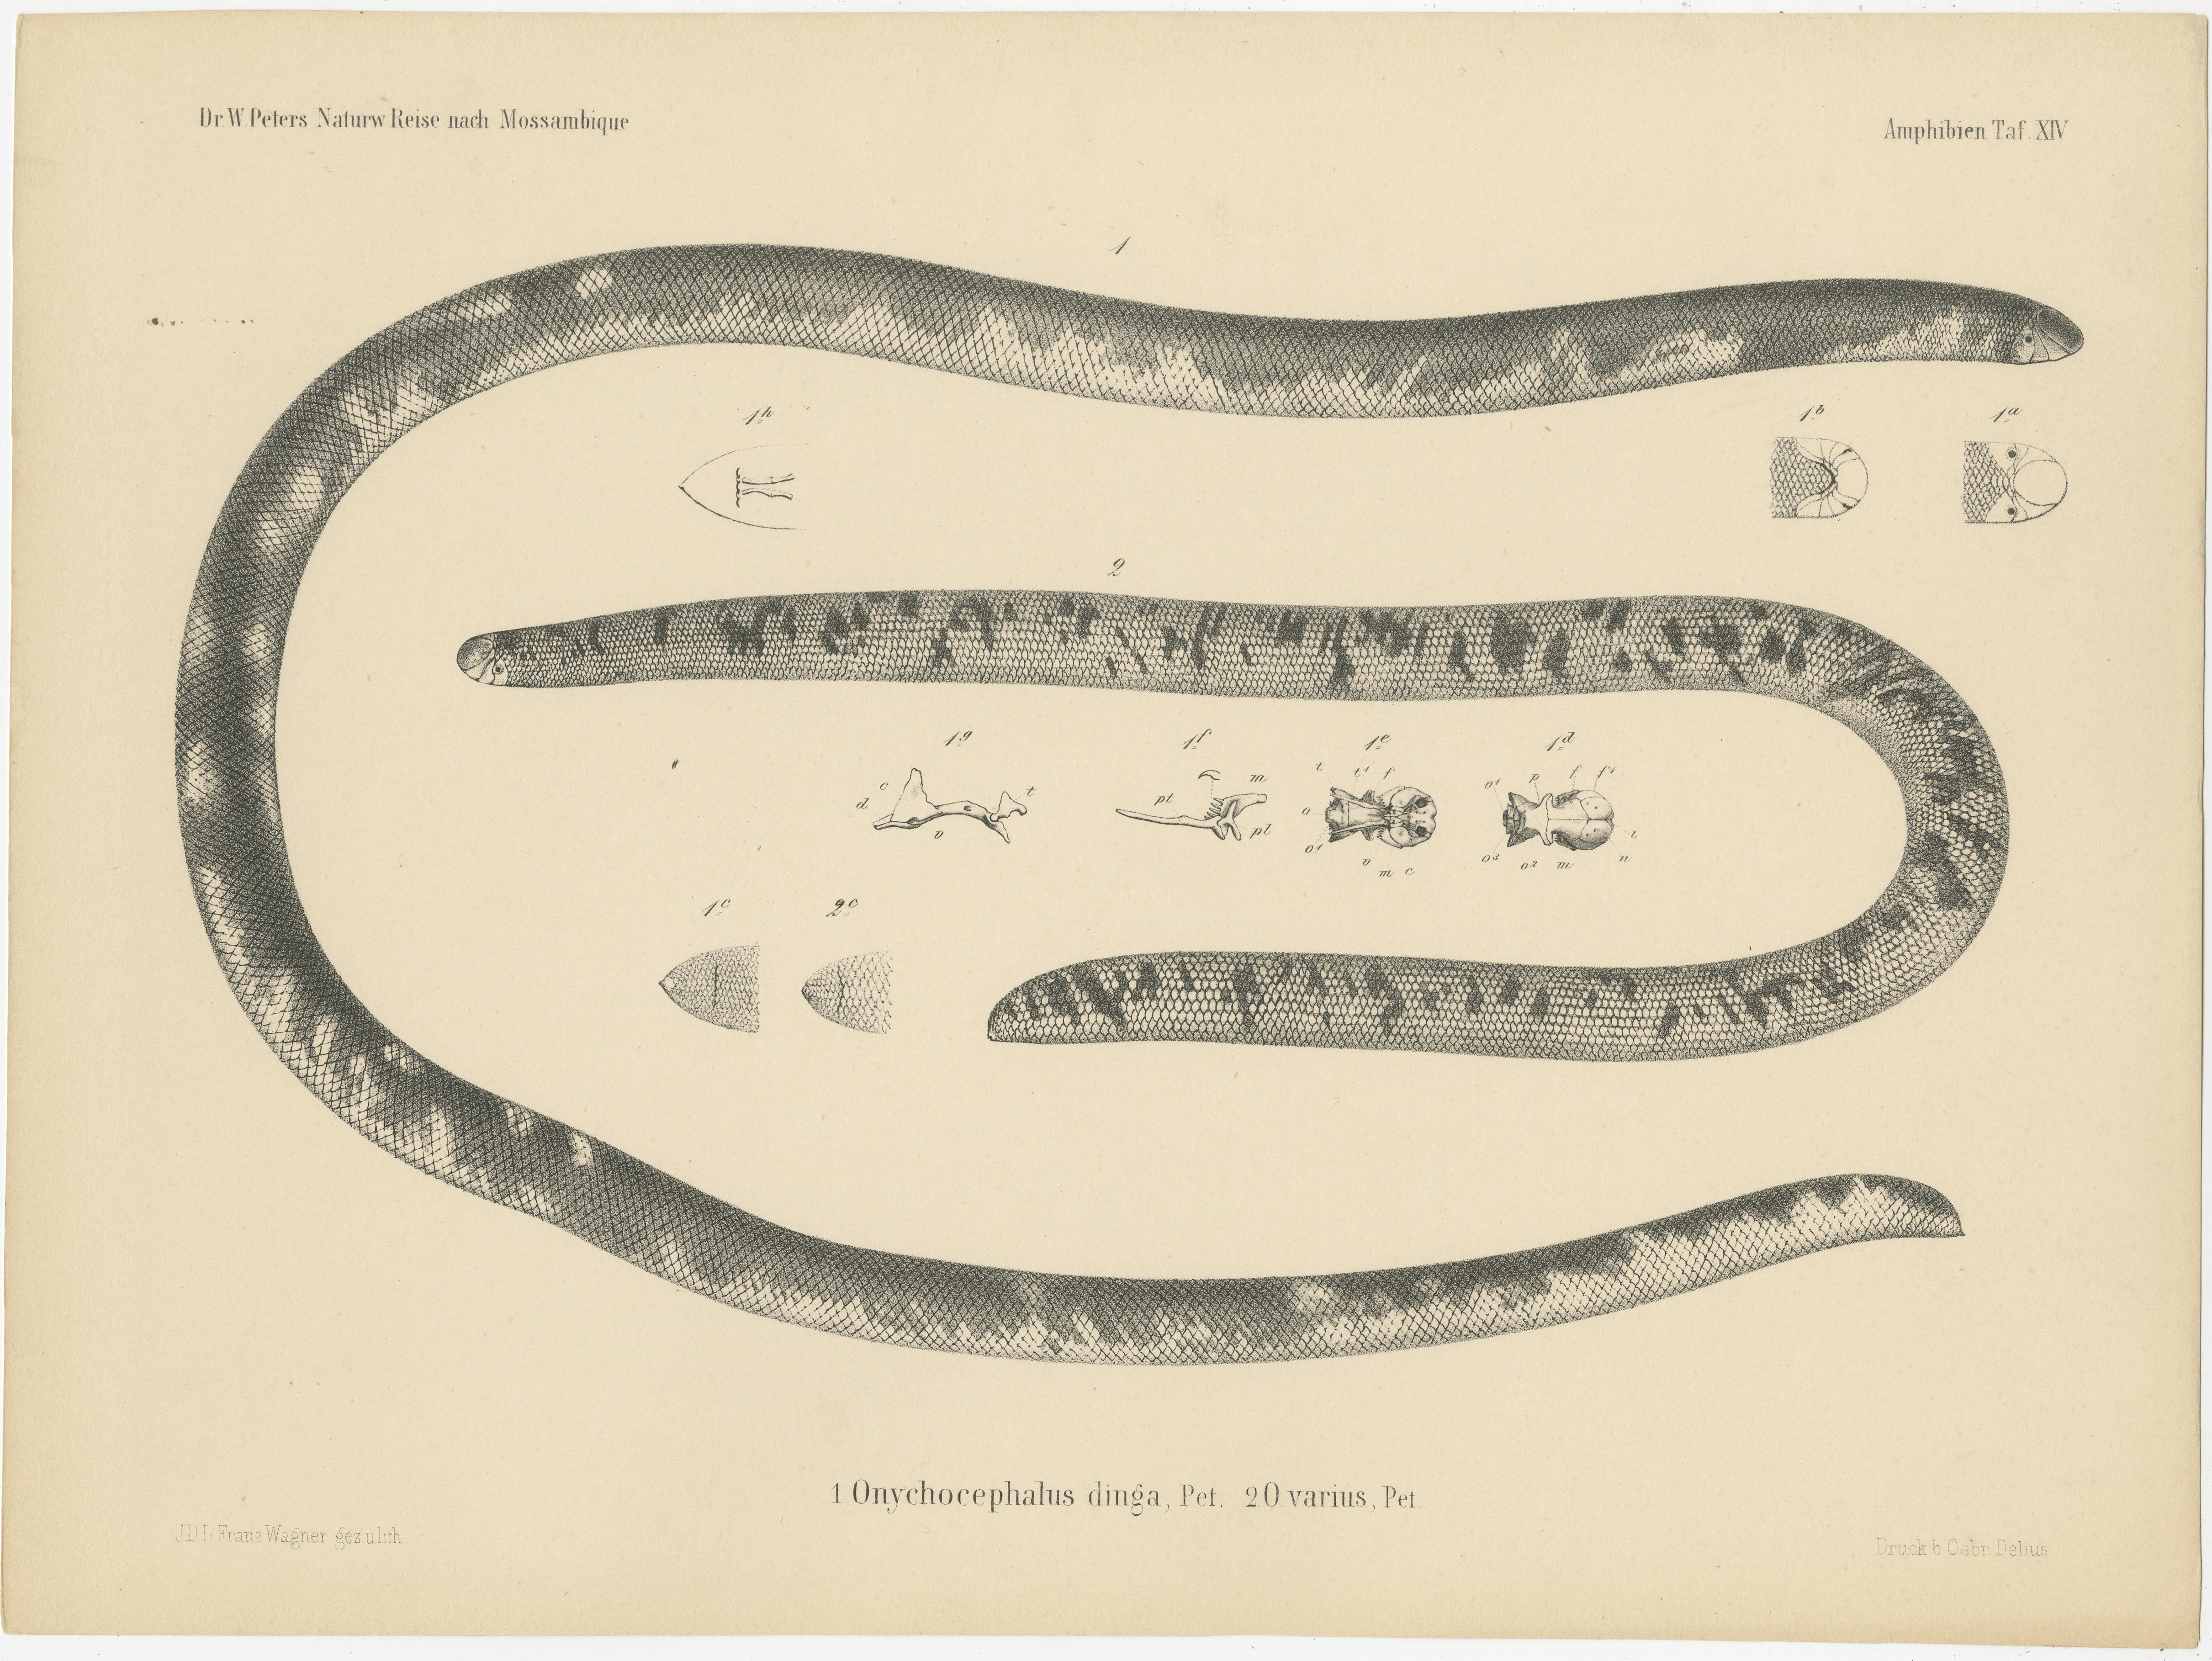 Antique print titled 'Onychocephalus dinga (..)'. Original antique print of the African giant blind snake. This print originates from 'Naturwissenschaftliche Reise nach Mossambique (..)' by Wilhelm C.H. Peters, published circa 1868.